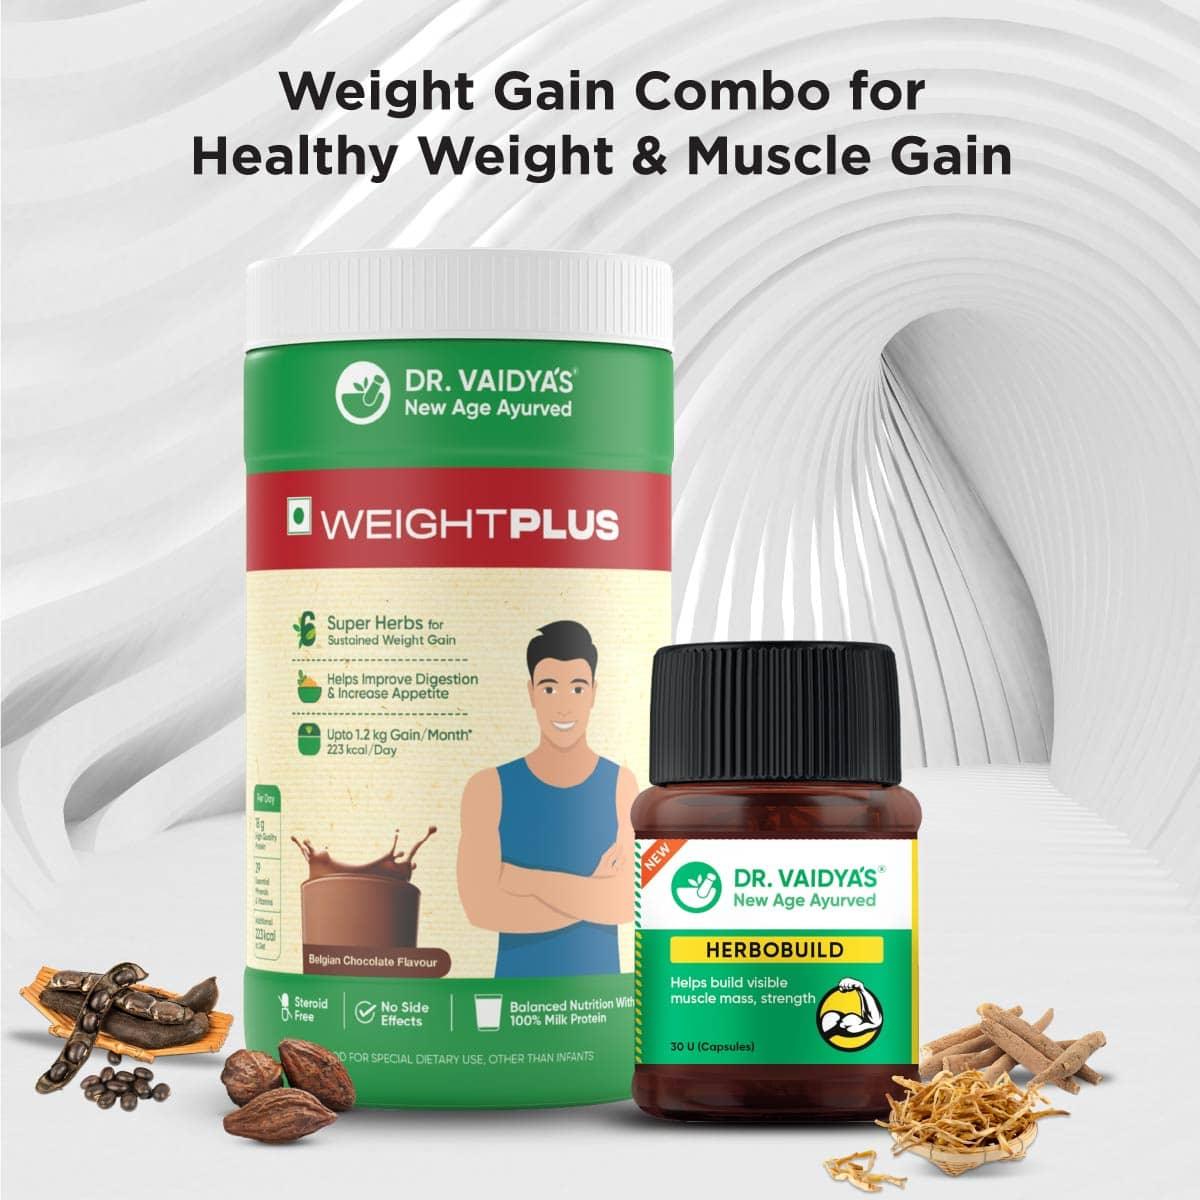 Weight Gain Combo: For Healthy Weight & Muscle Gain - Herbobuild